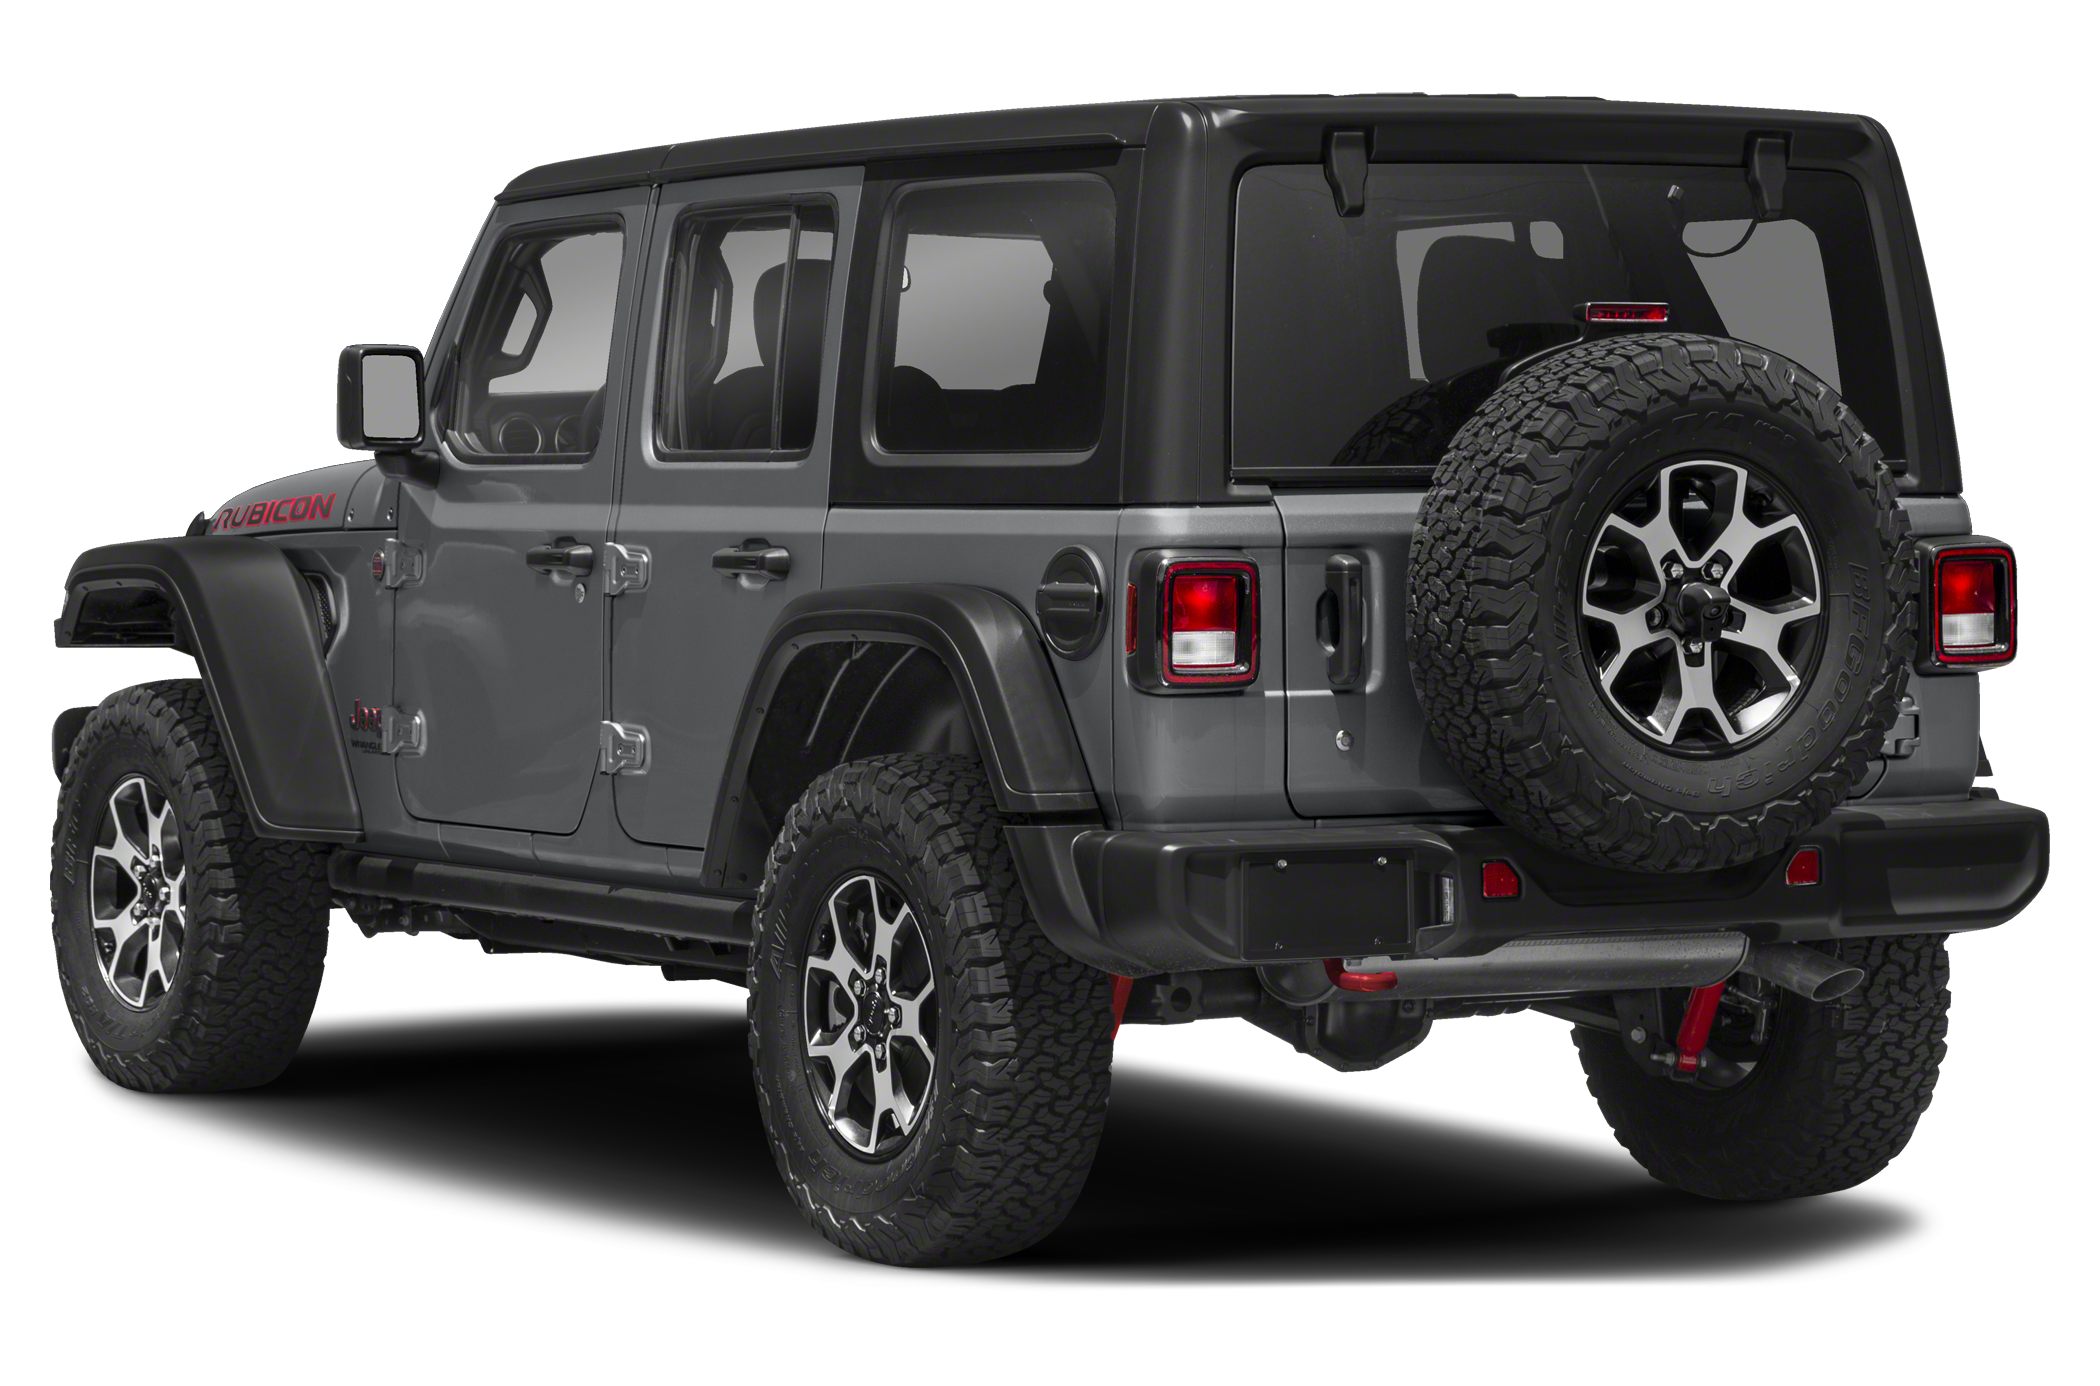 21 Jeep Wrangler Unlimited Rubicon 4dr 4x4 Pricing And Options